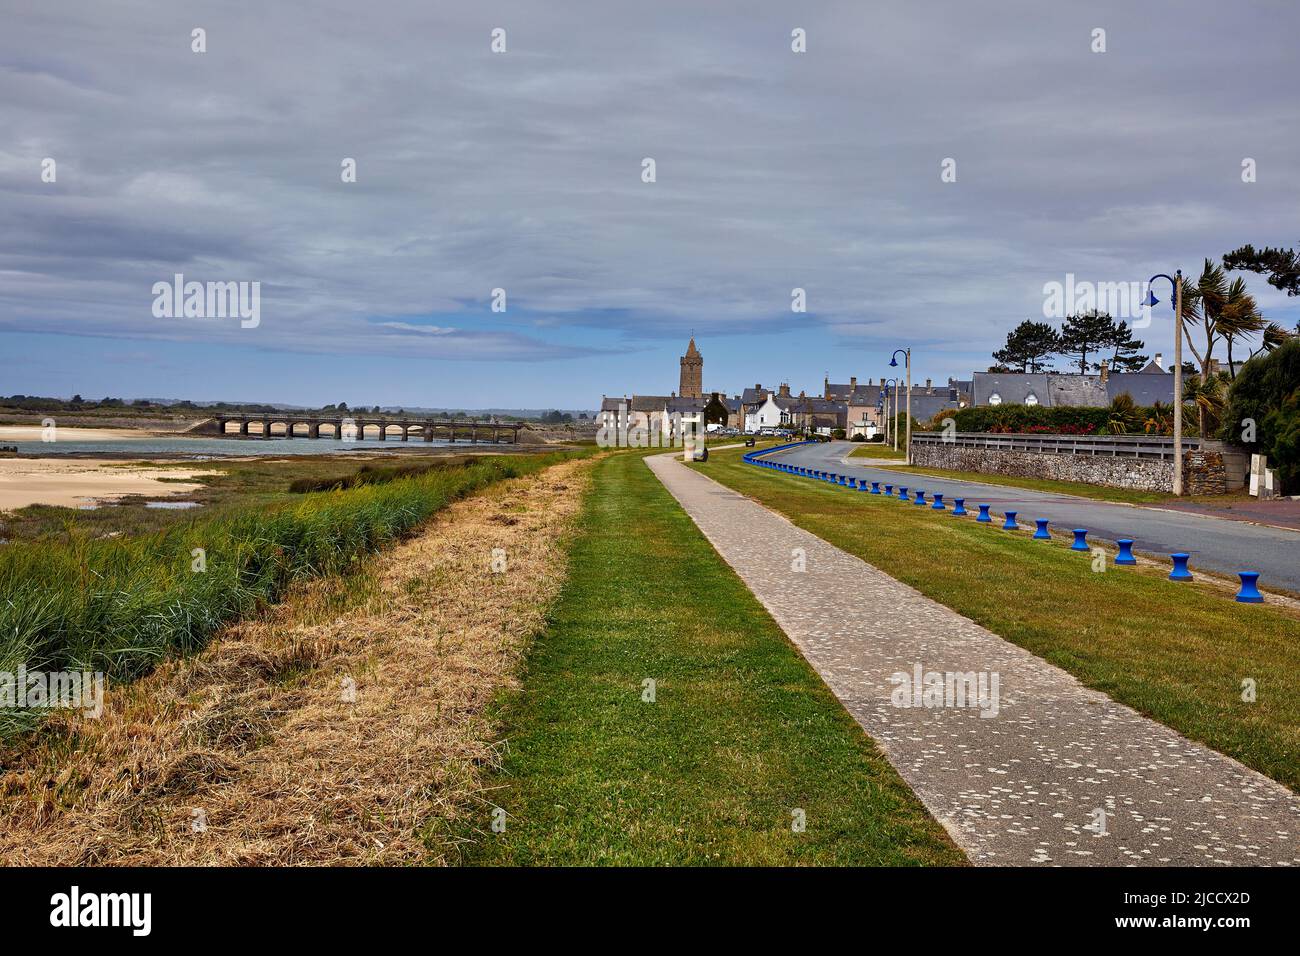 Image of Port Bail, Normandy, France with walk, bridge and church. Stock Photo